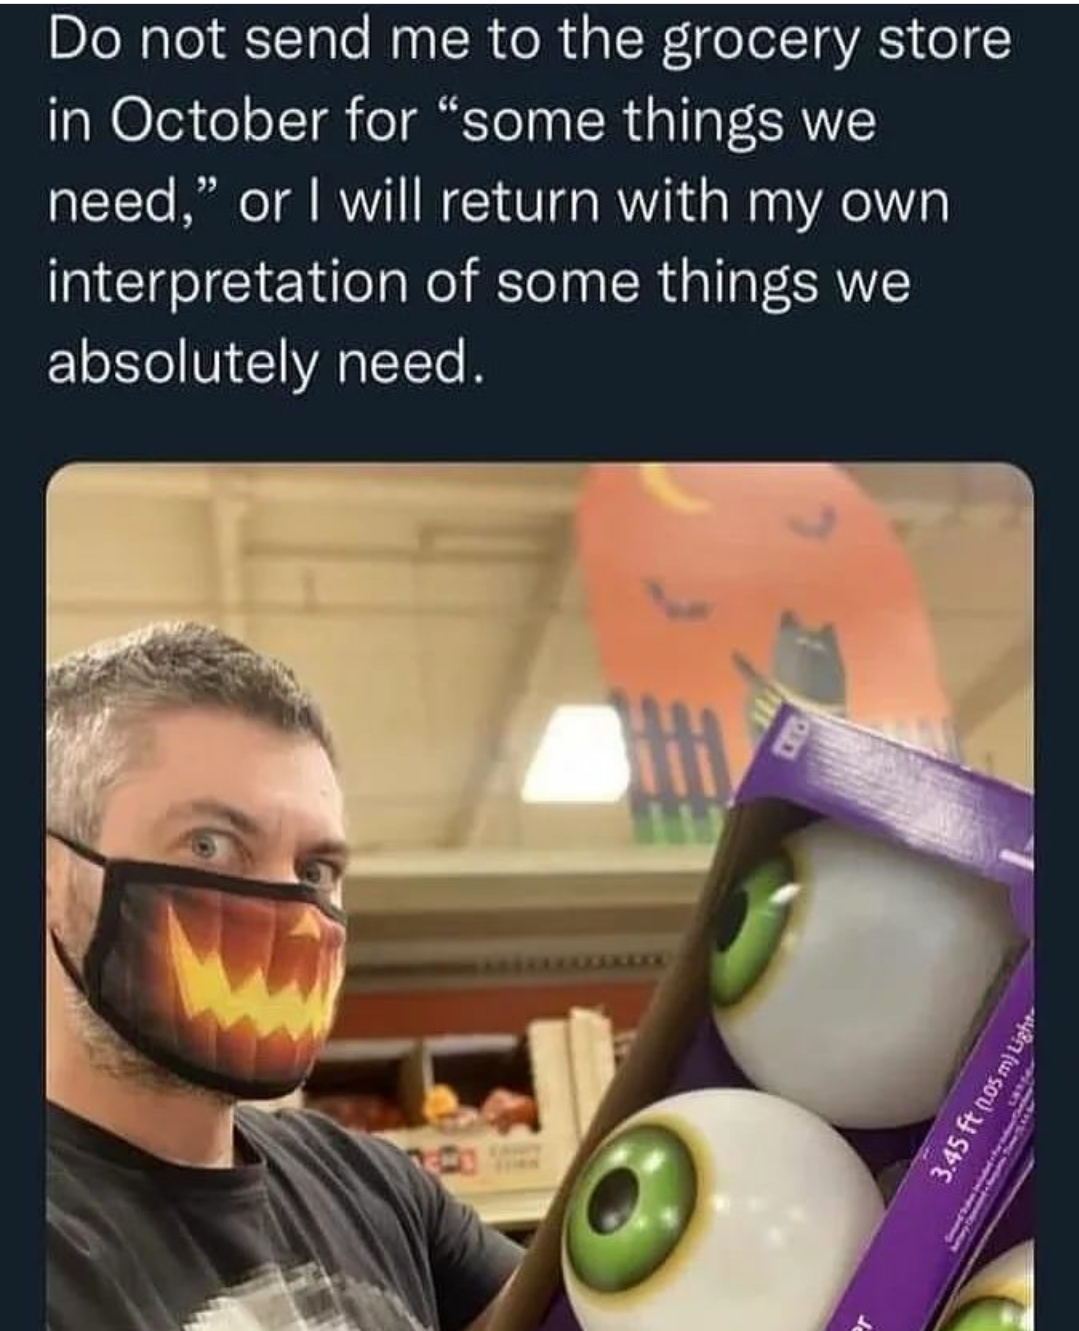 funny memes - halloween memes - photo caption - Do not send me to the grocery store in October for "some things we need," or I will return with my own interpretation of some things we absolutely need. 3.45 ft .osmi Ligh